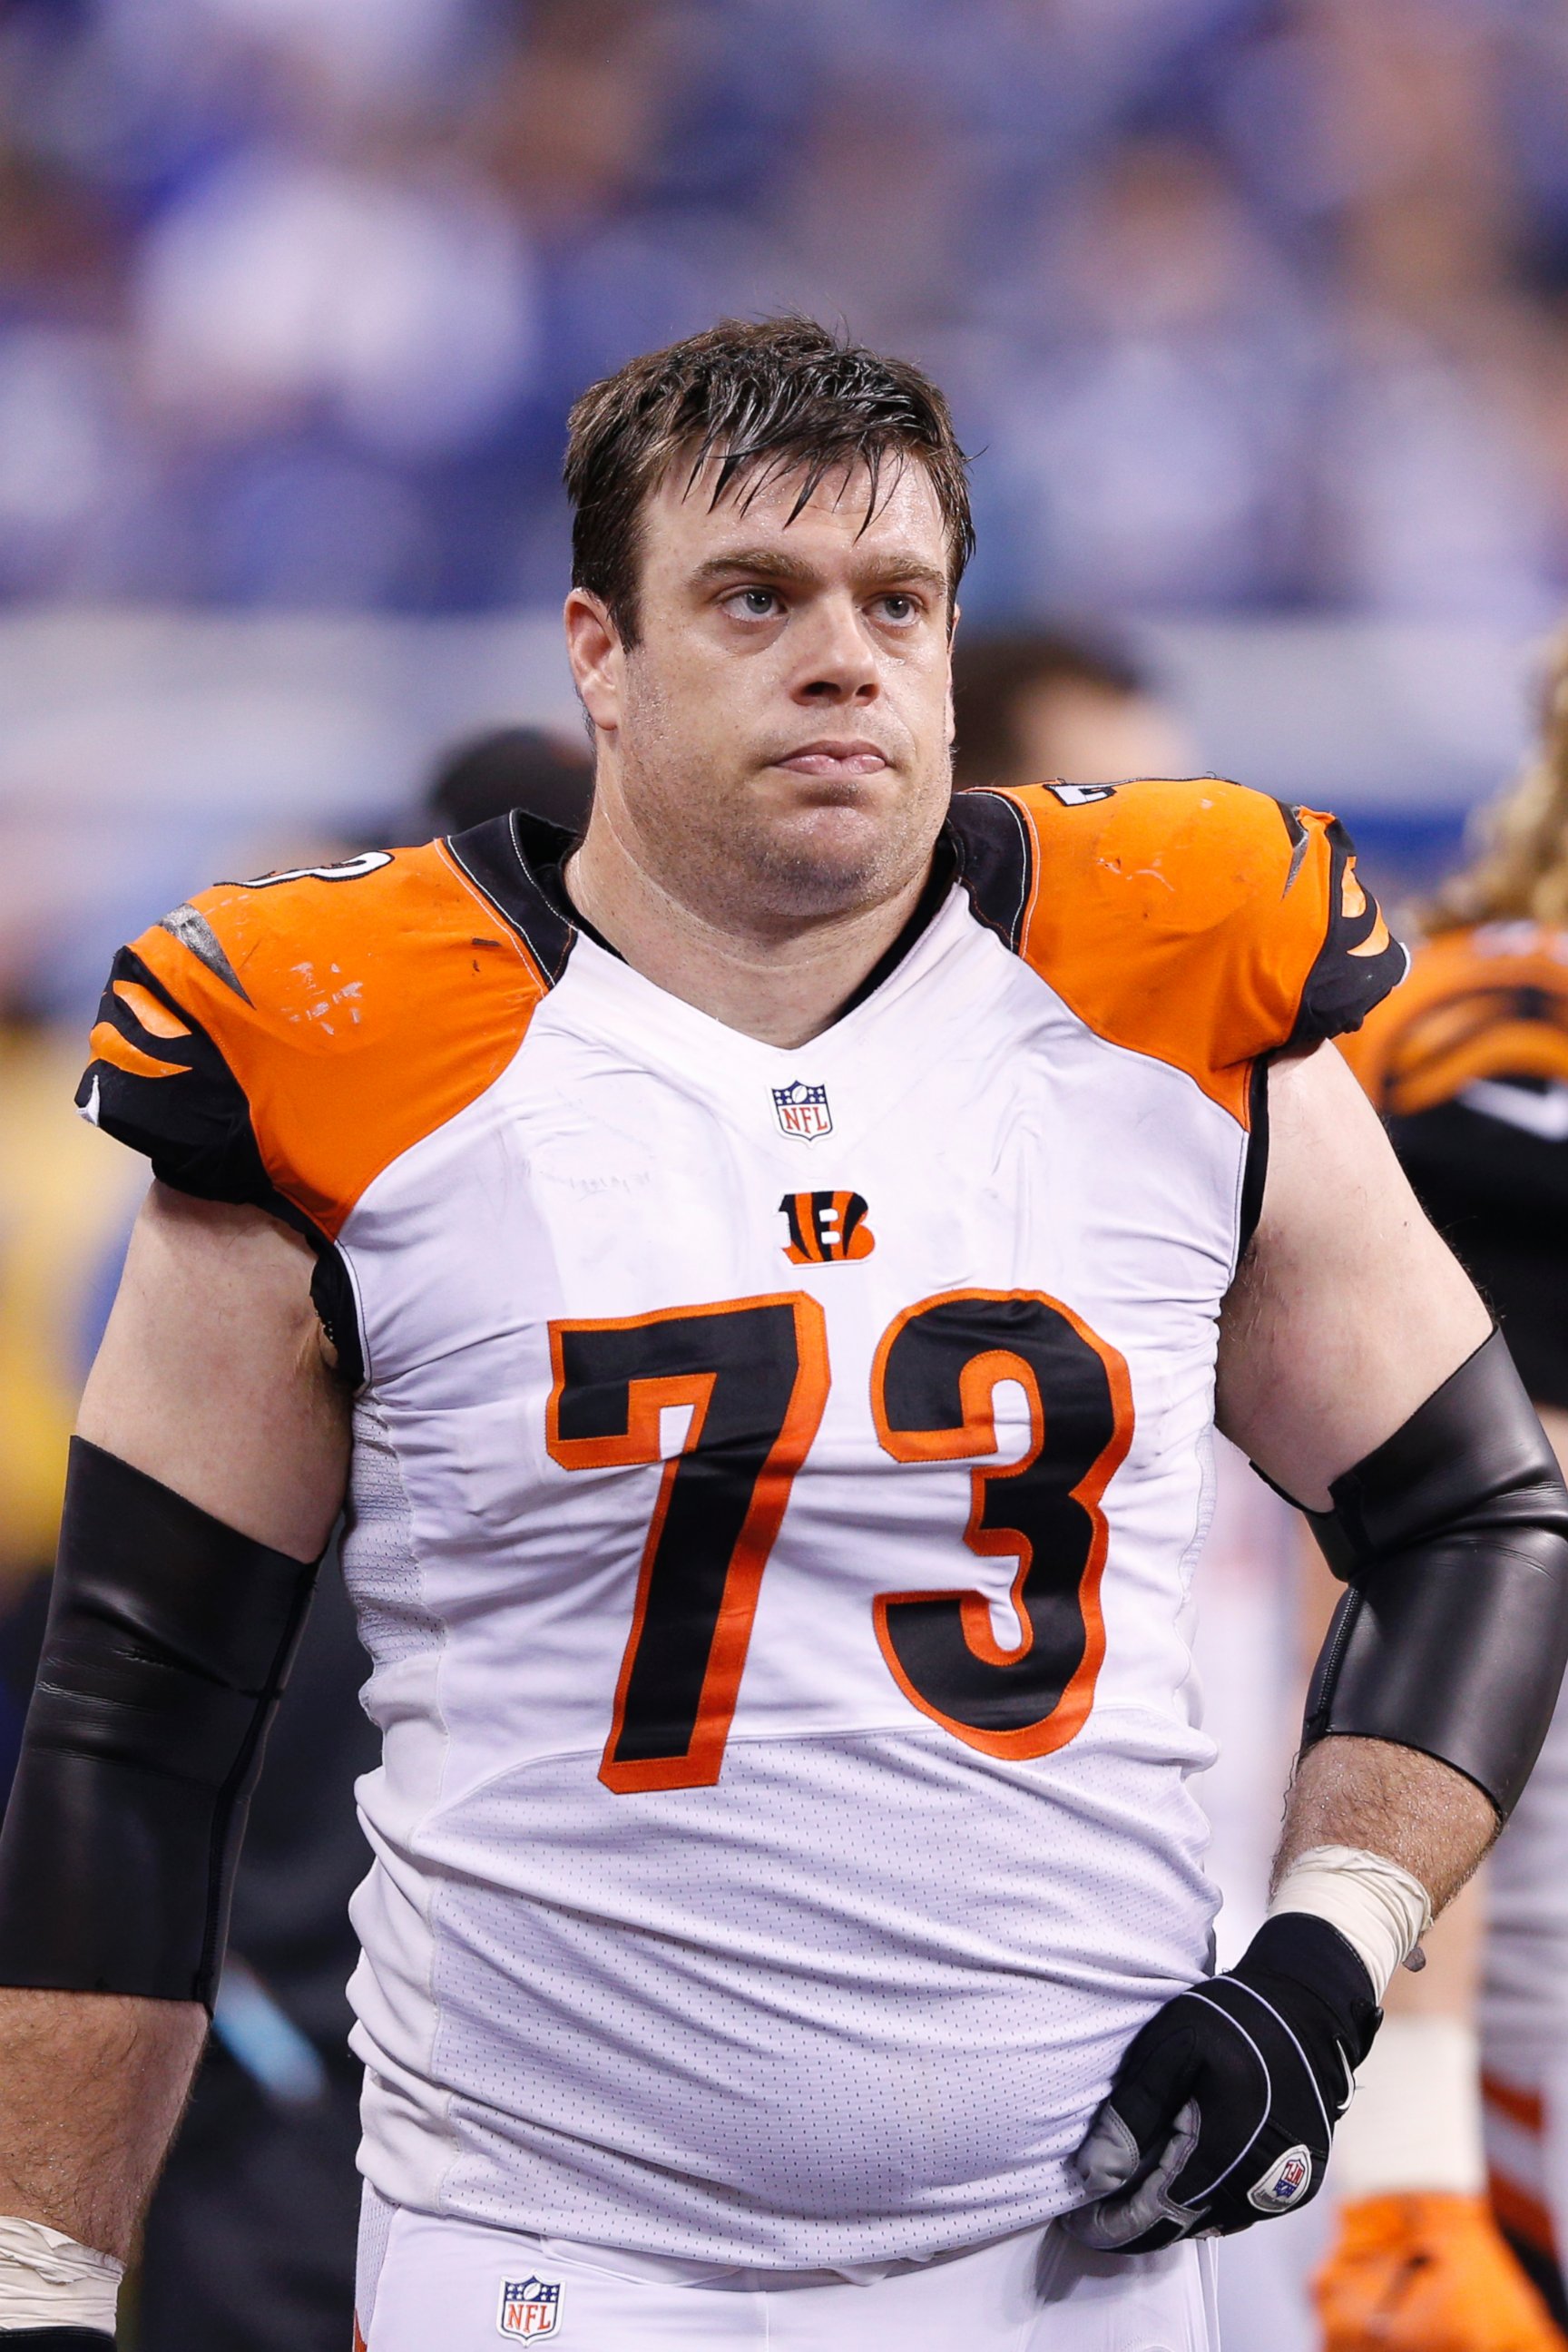 PHOTO: Eric Winston of the Cincinnati Bengals during the AFC Wild Card game against the Indianapolis Colts on January 4, 2015 in Indianapolis, Indiana.